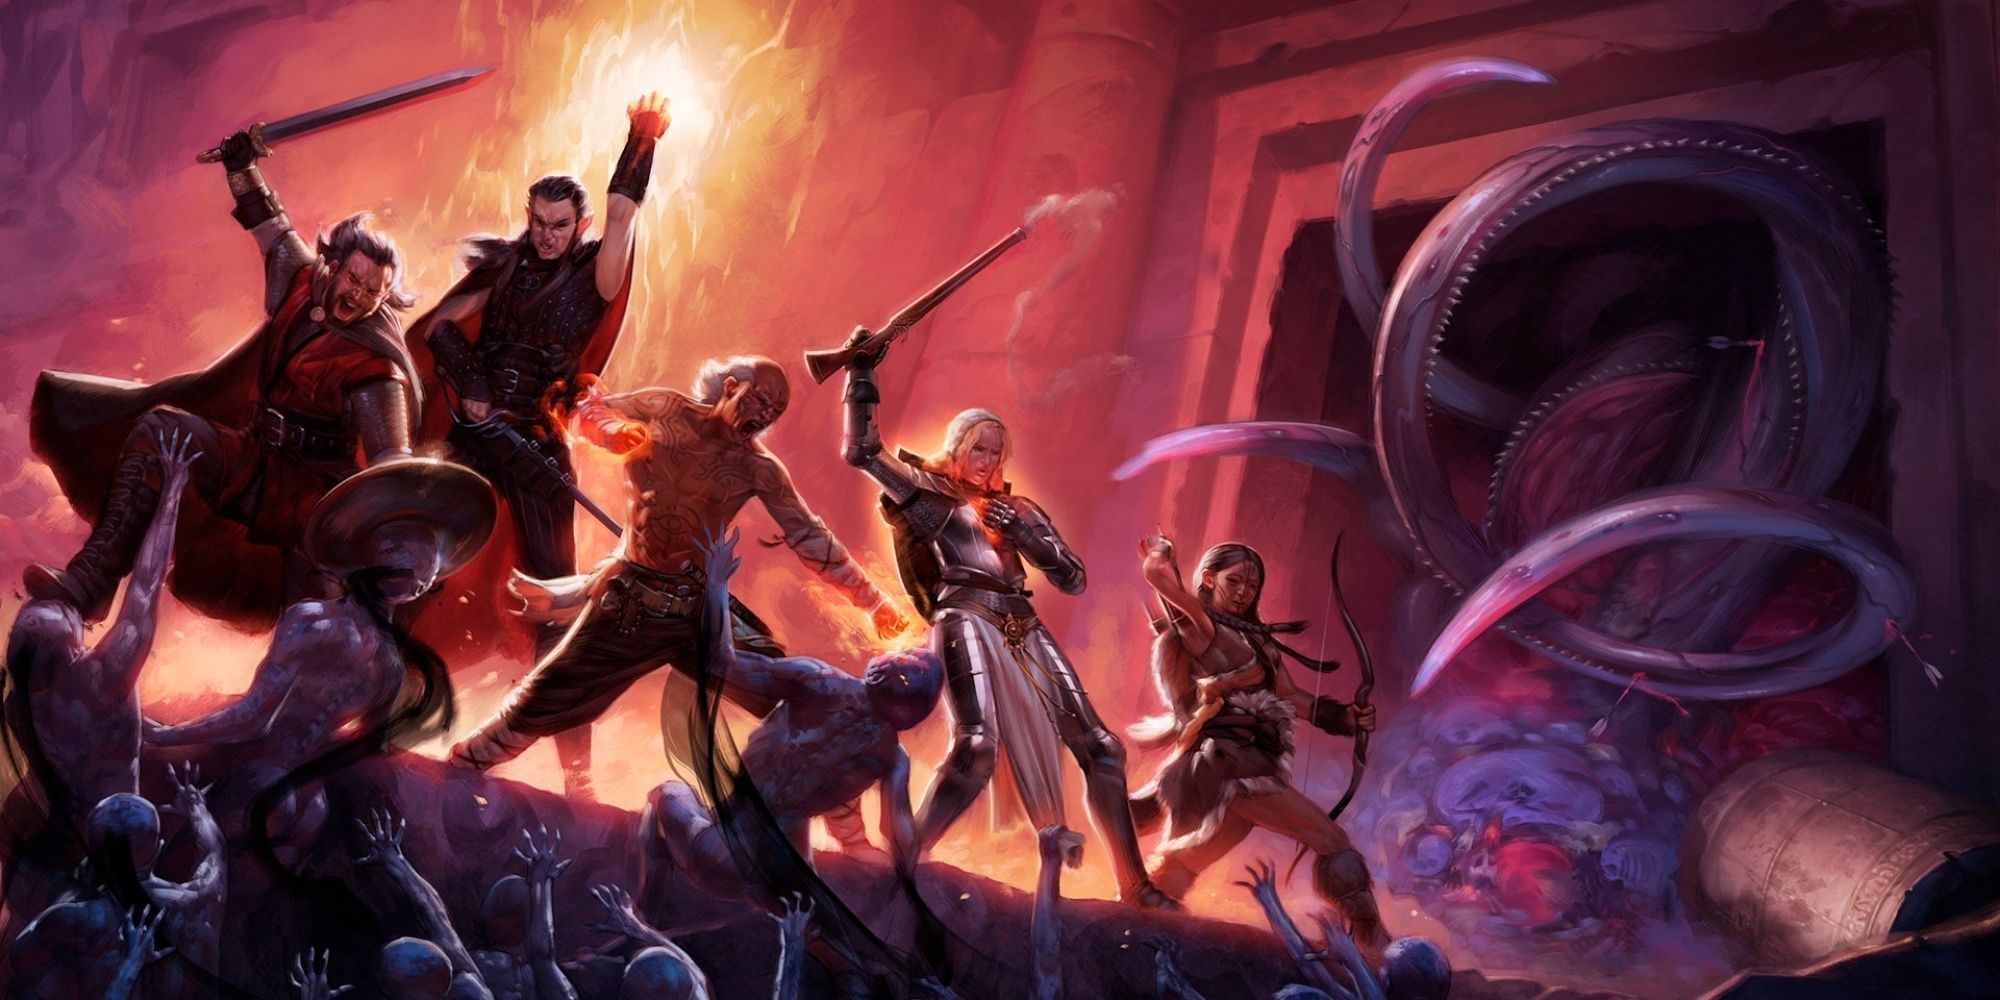 Pillars Of Eternity - The Party fighting monsters